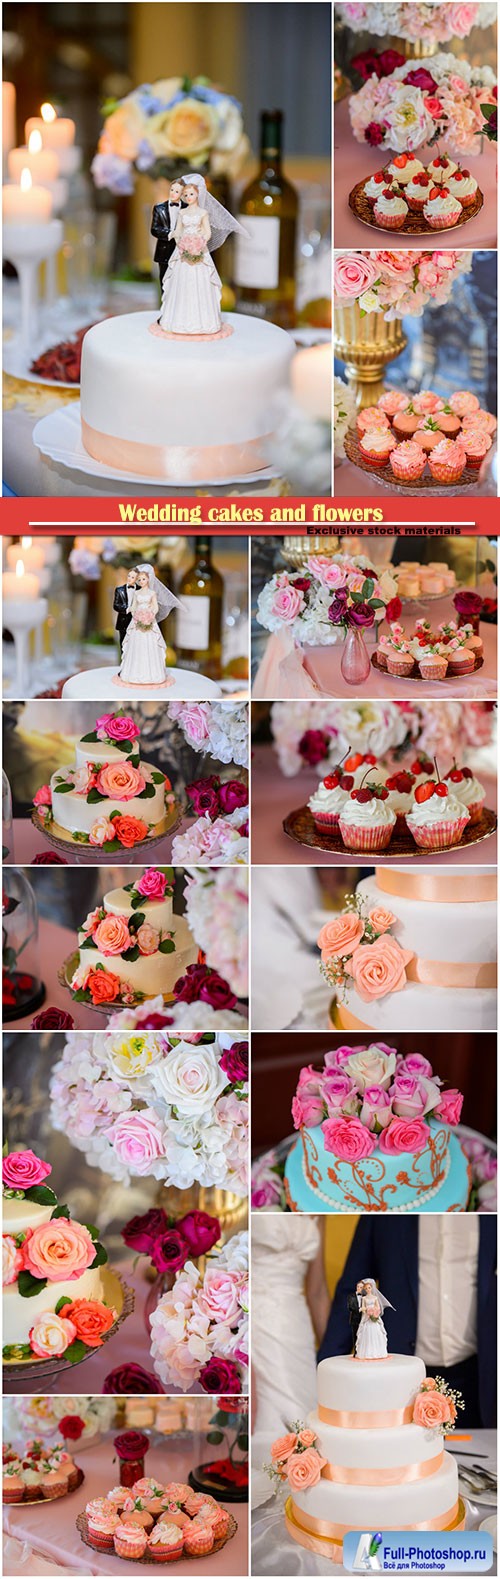 Wedding cakes and flowers